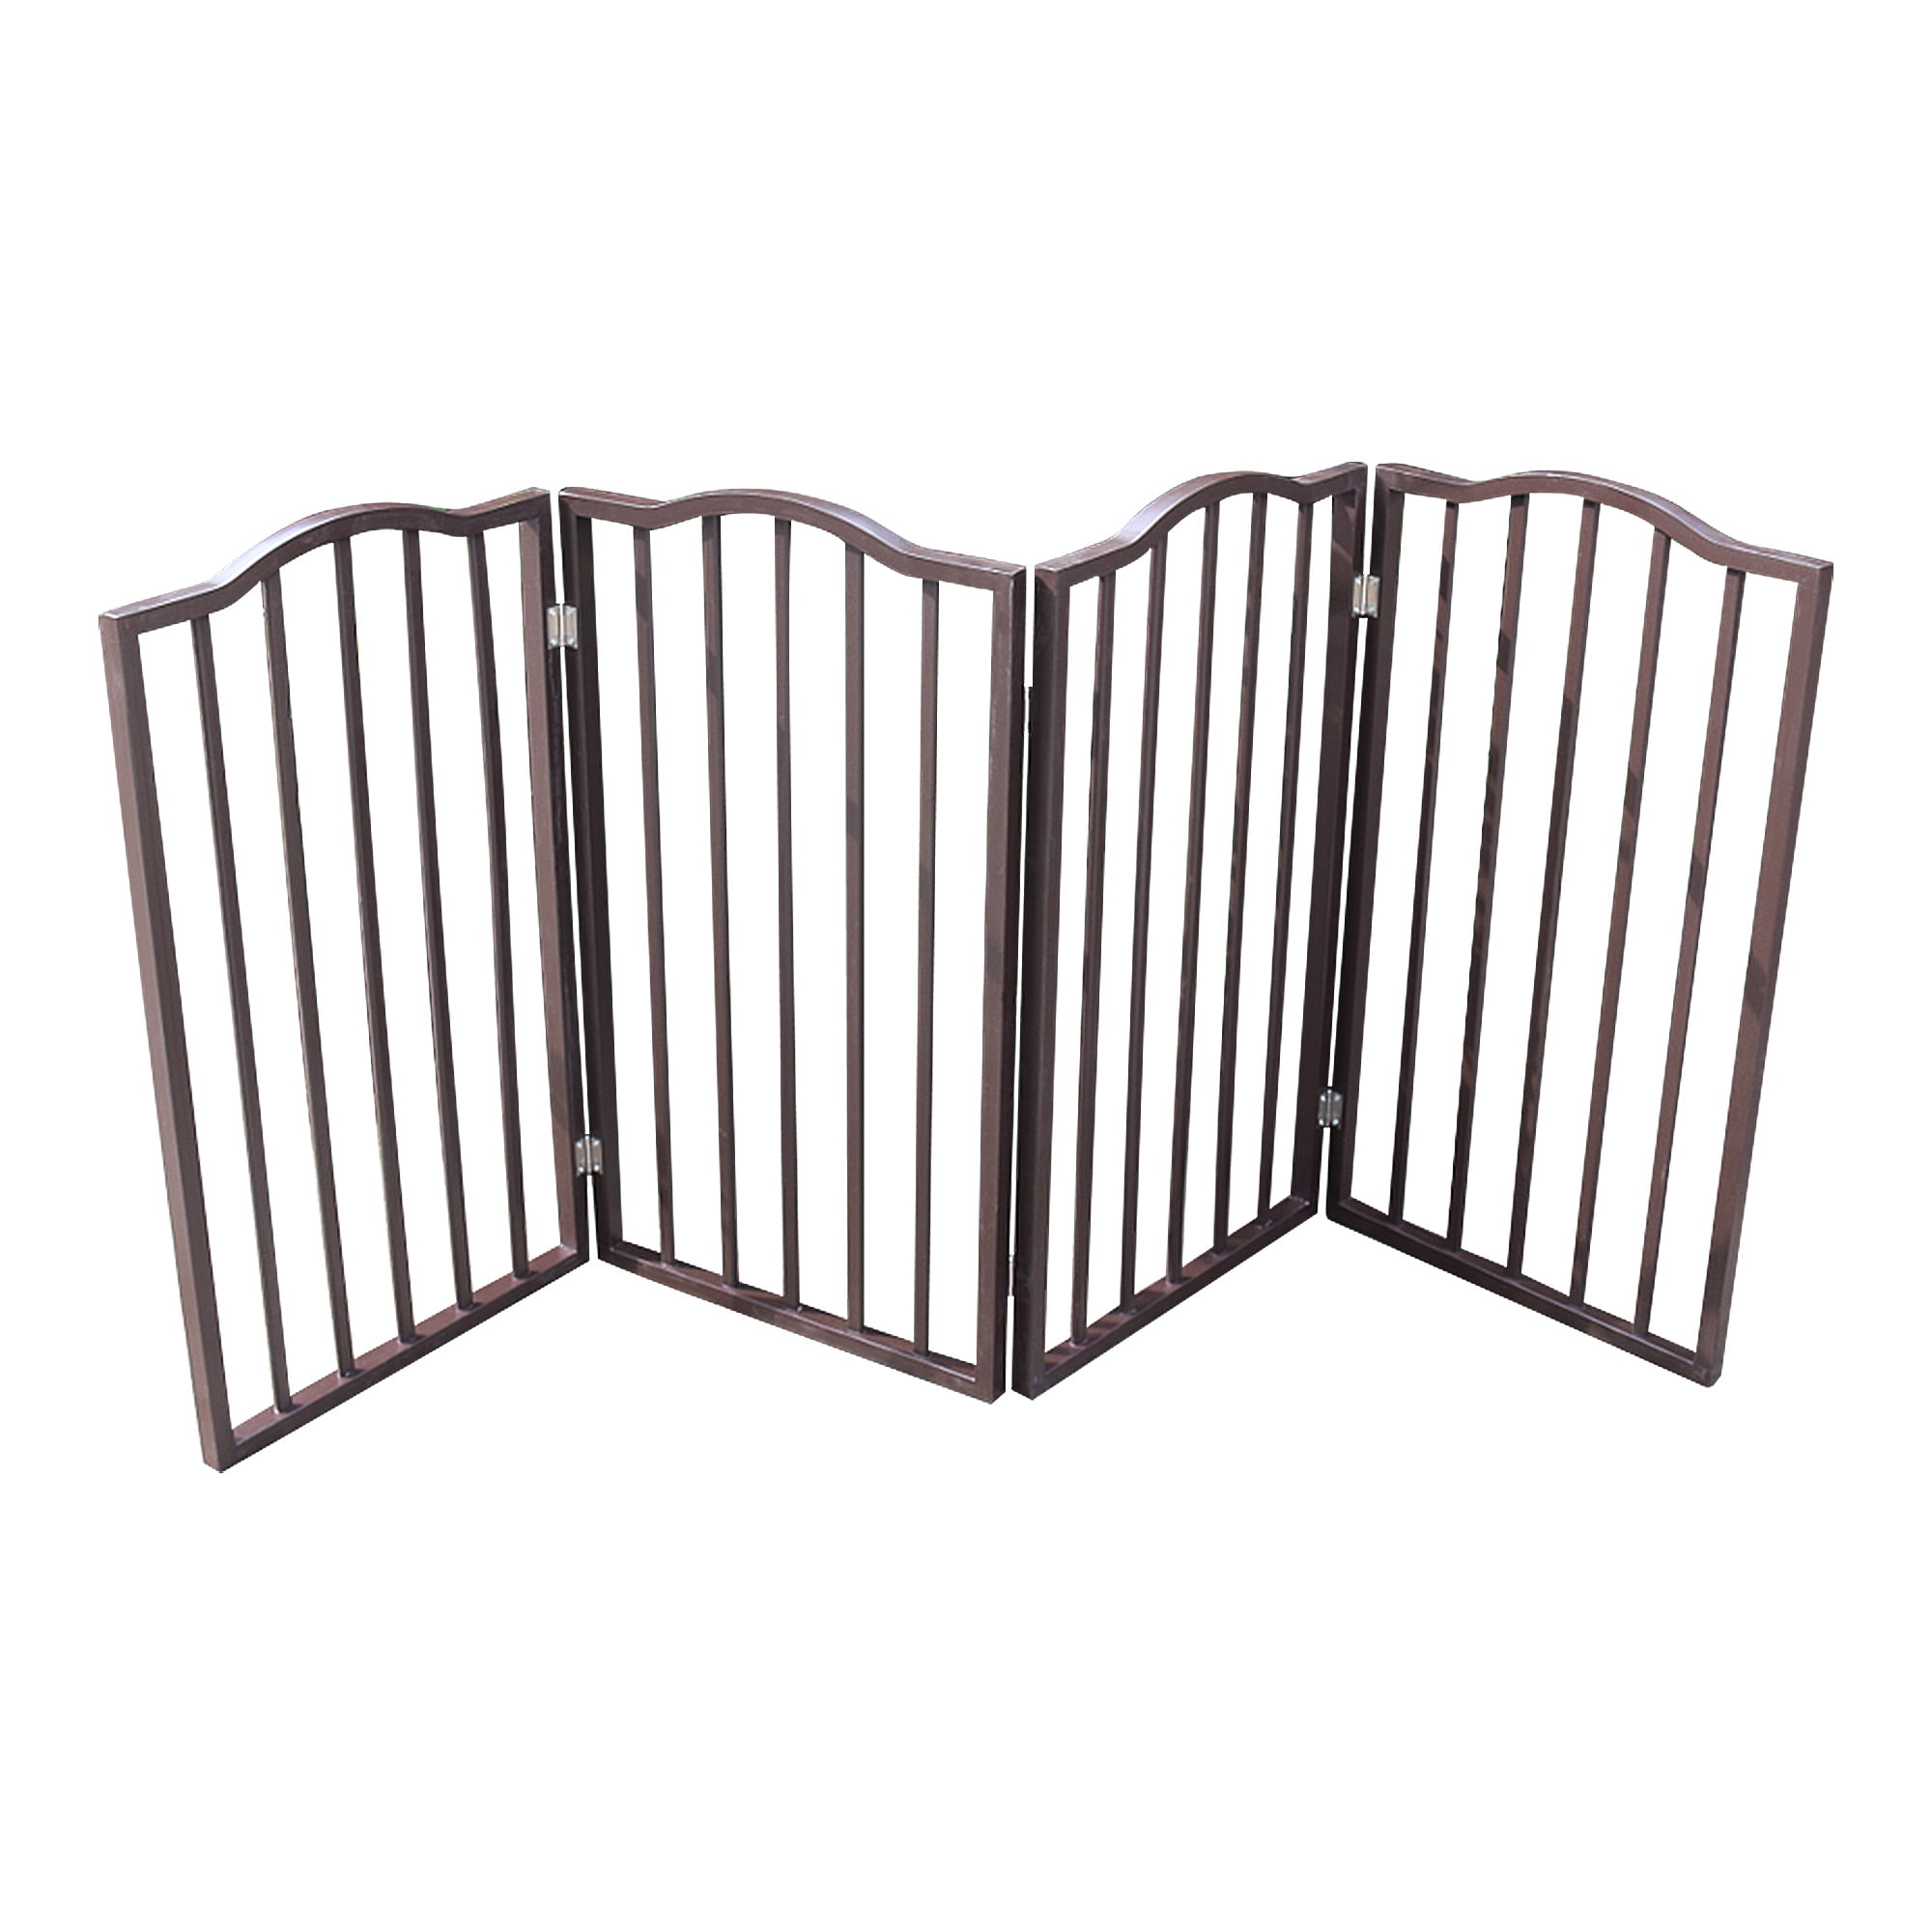 Pet Safety Fence Pet Gate Freestanding for House Doorway Stairs Small Wooden Dog Gate Foldable 3 Panels with Door Medium Sized Pets